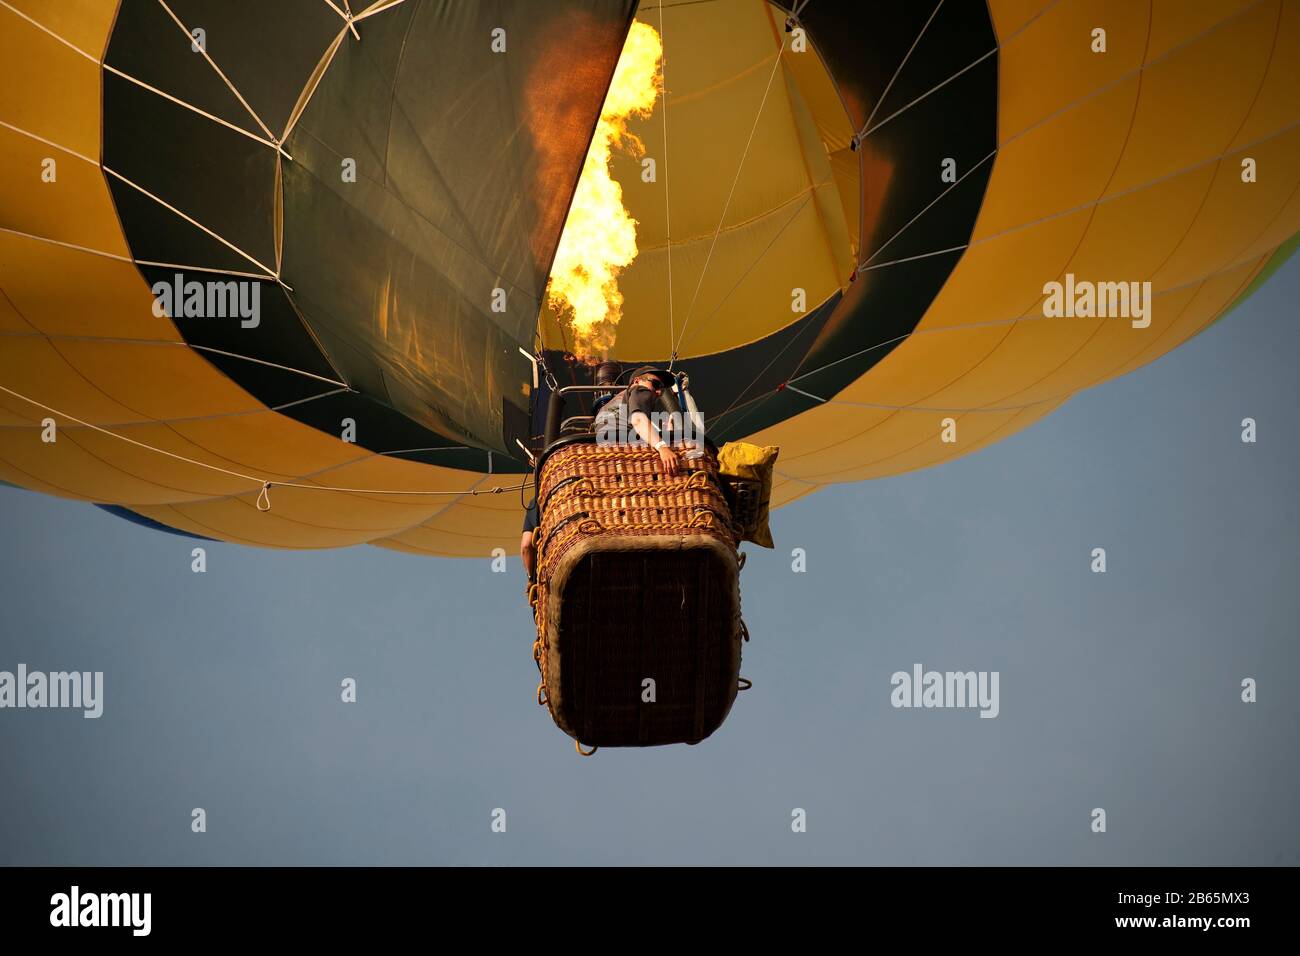 Ascending Hot Air Balloon With Burner Alight Stock Photo